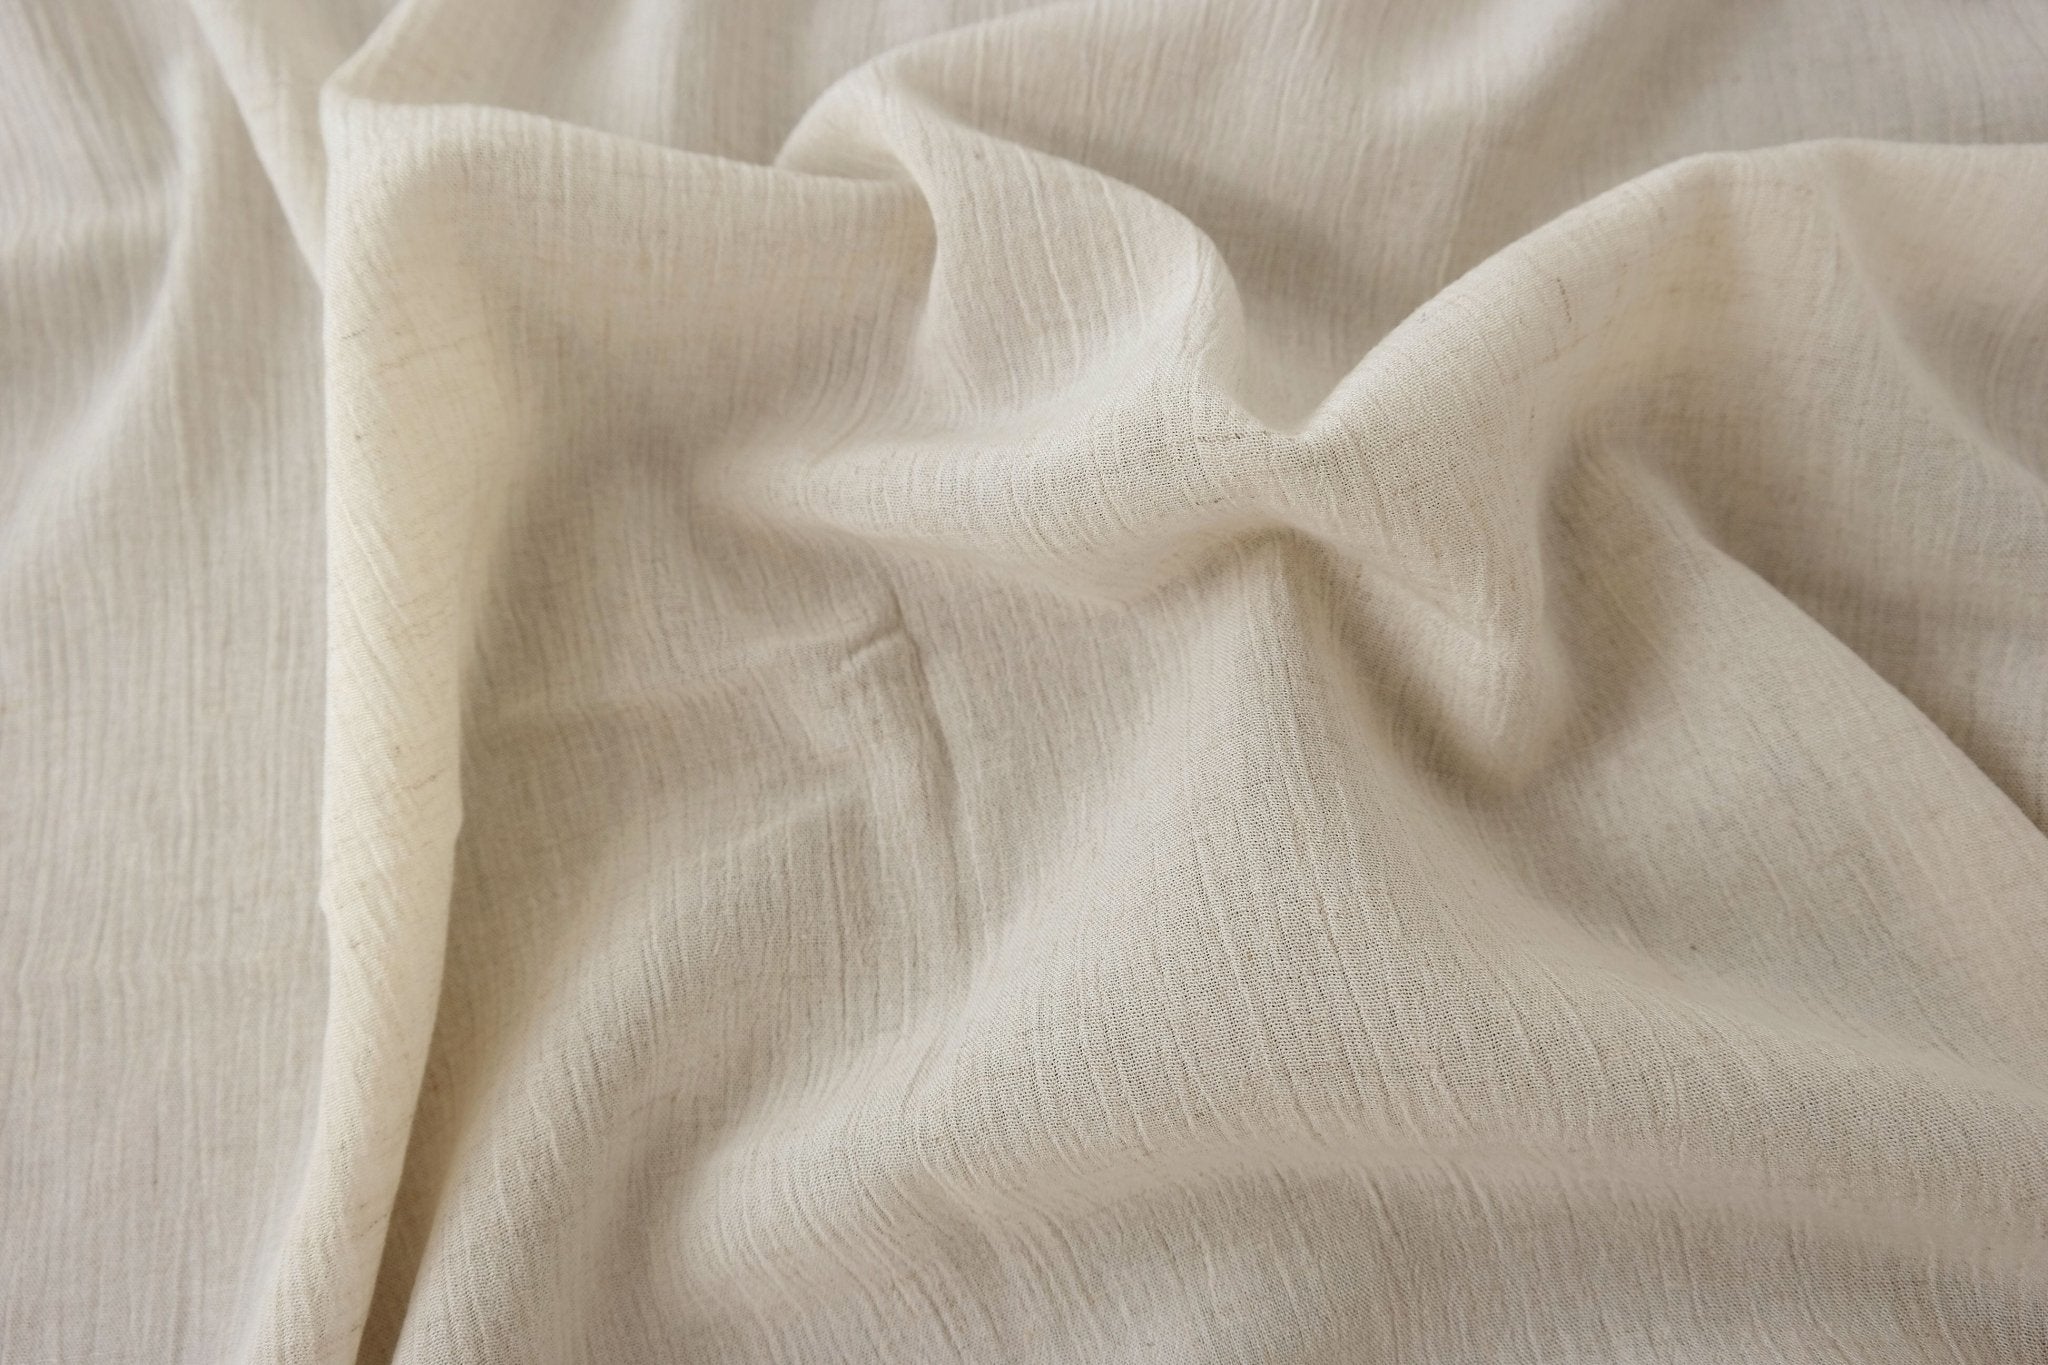 Linen Rayon 30s Wrinkled Fabric - The Linen Lab - Light Natural